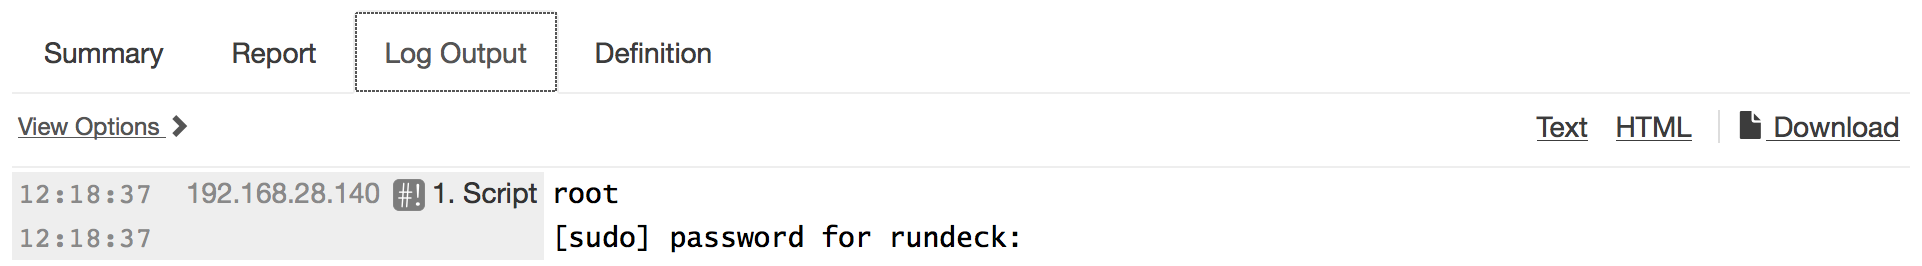 rundeck-execute_locally_a_command_with_sudo_password-log_output.png